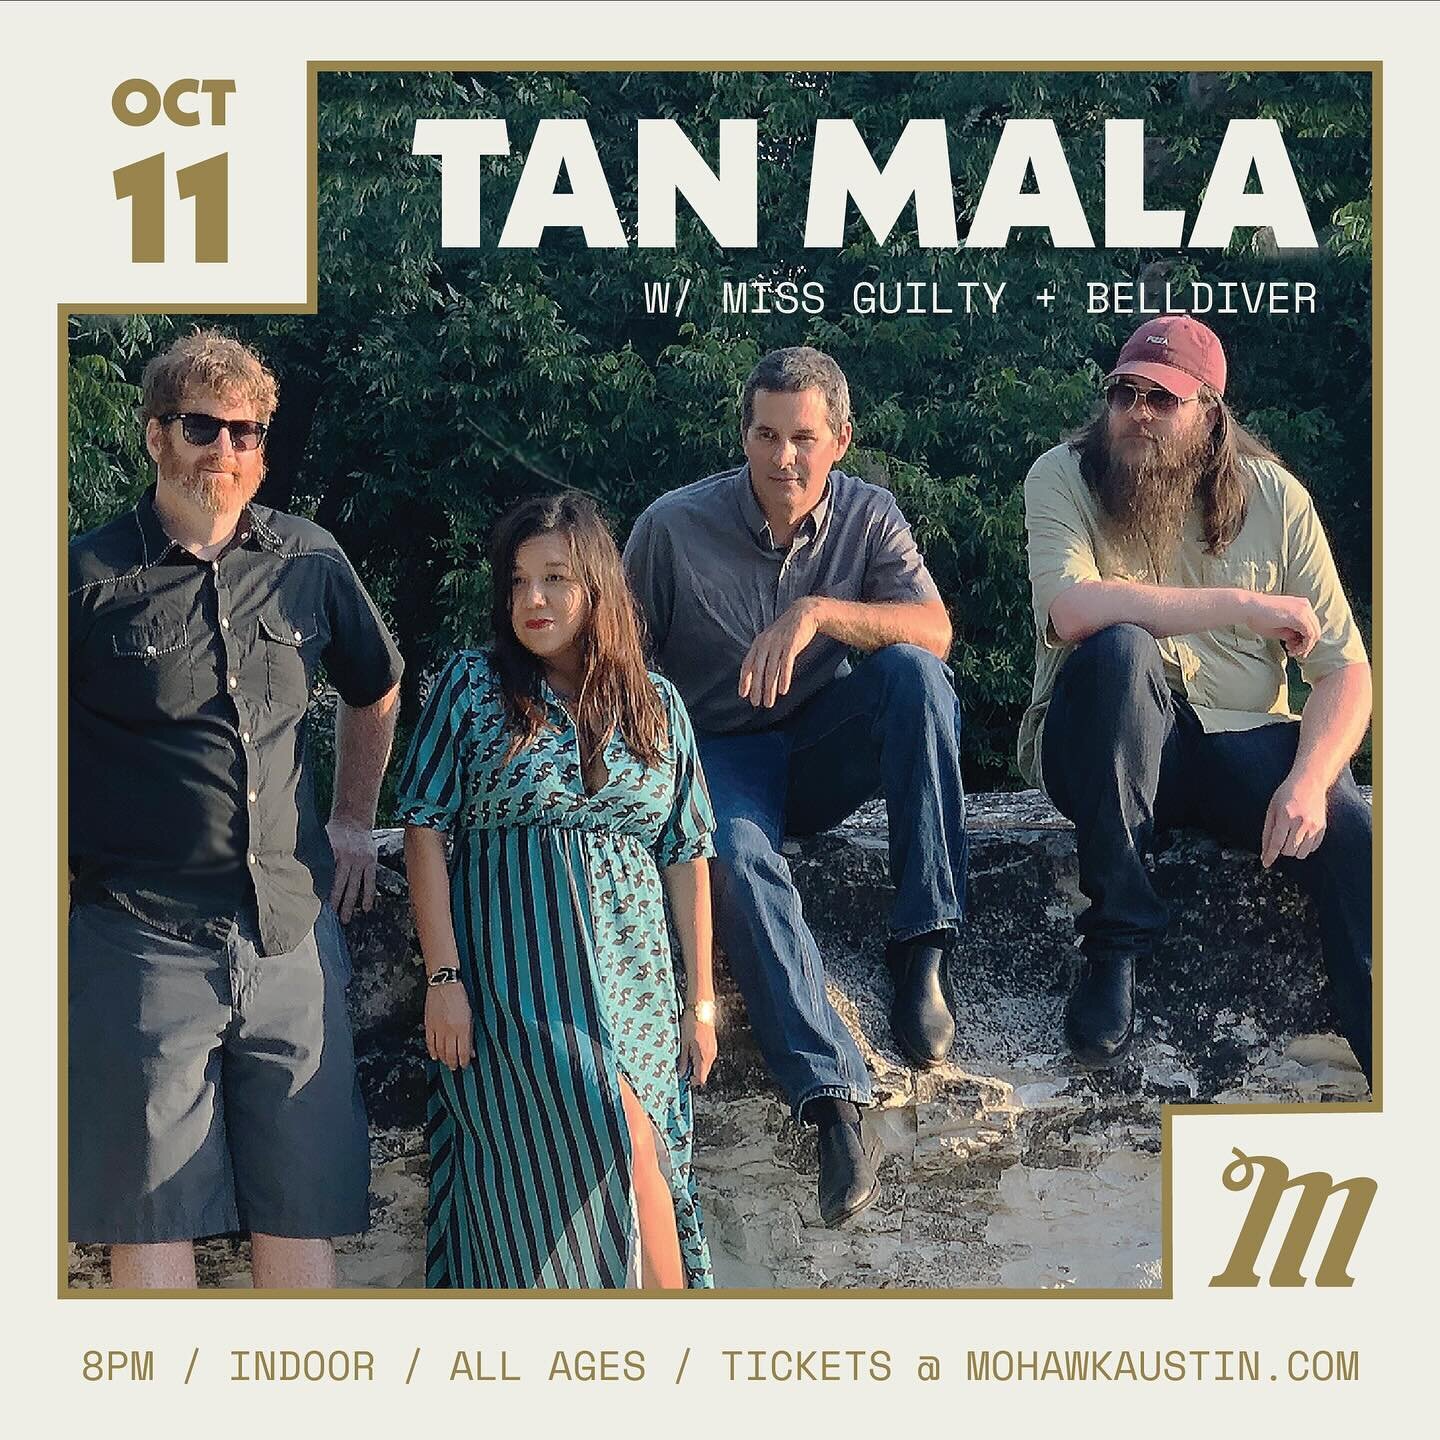 Join us for a great evening of music on Wednesday night at @mohawkaustin!

We kick things off at 9, followed by our good friends @missguilty at 10, and @tanmala_music at 11. 

See you there!!